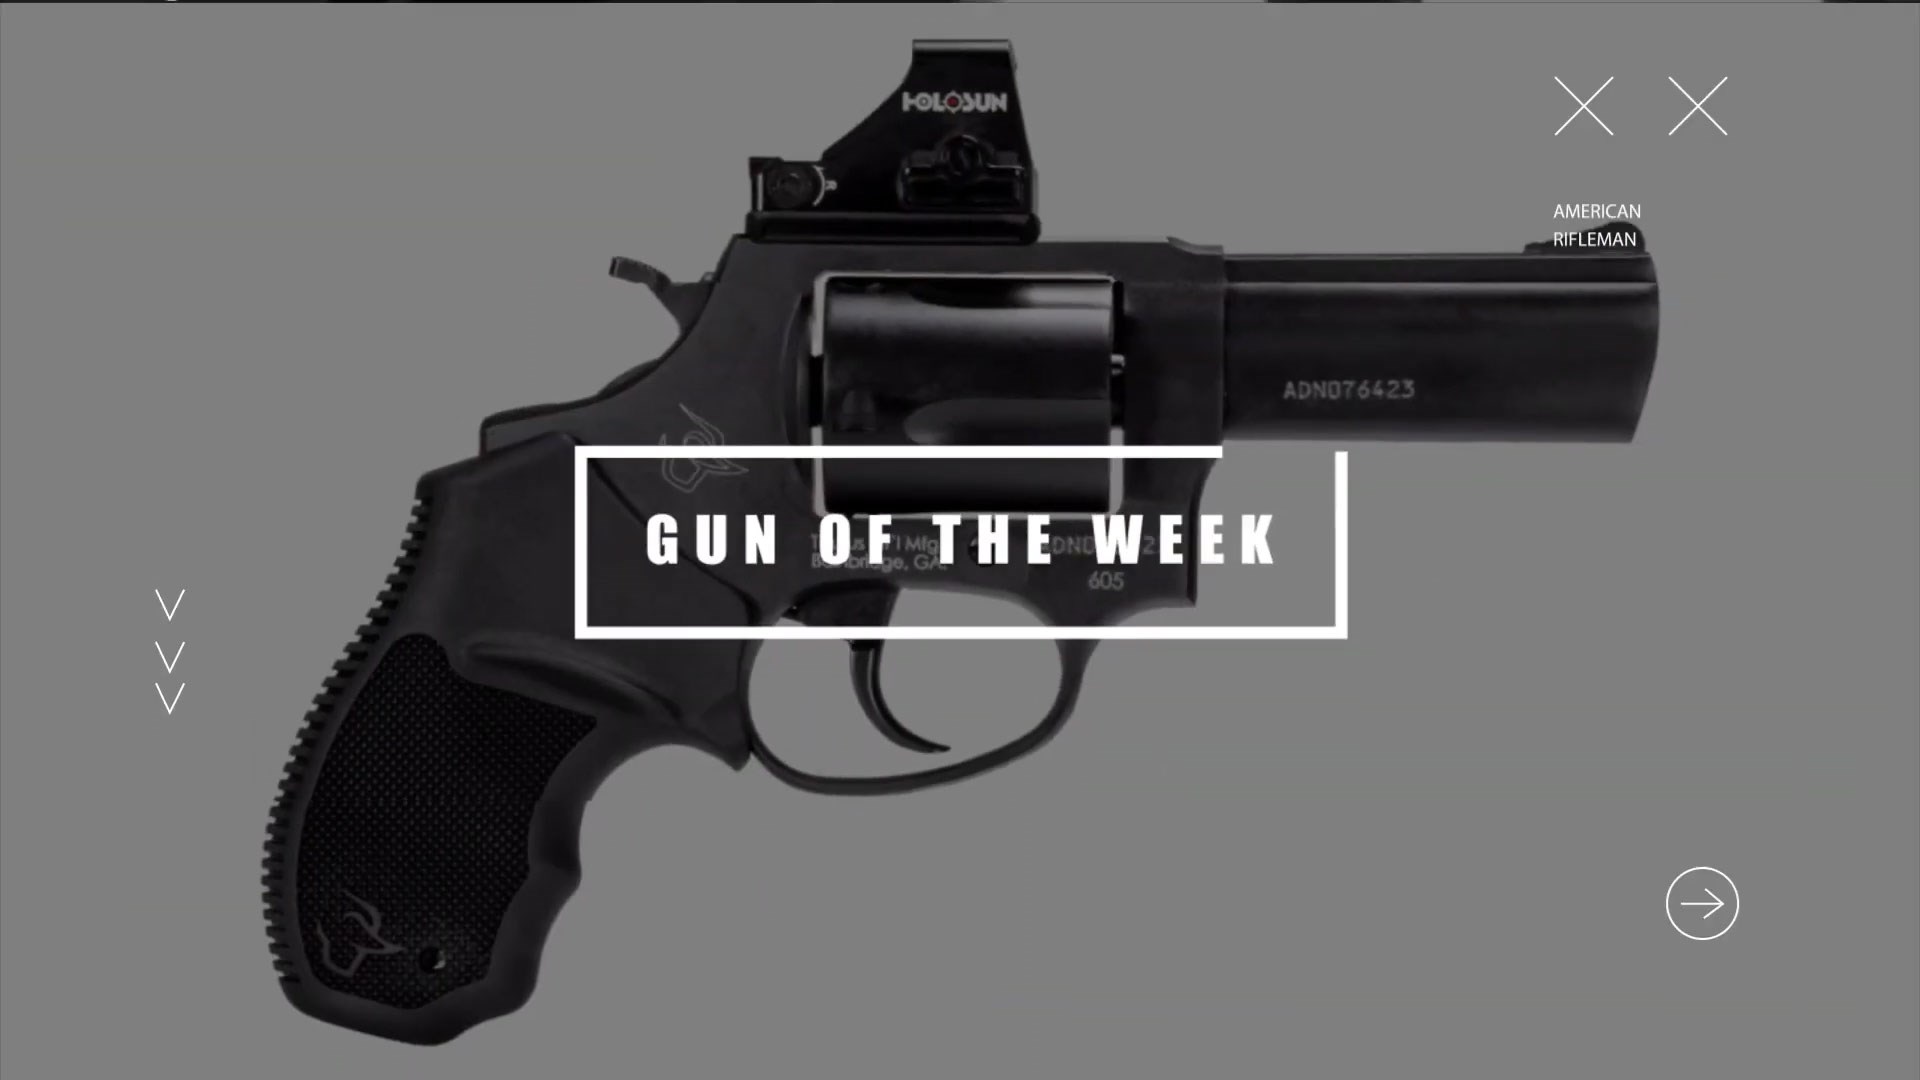 Gun Of The Week title screen with Taurus USA Model 605 T.O.R.O. optic-ready revolver background darkened gray